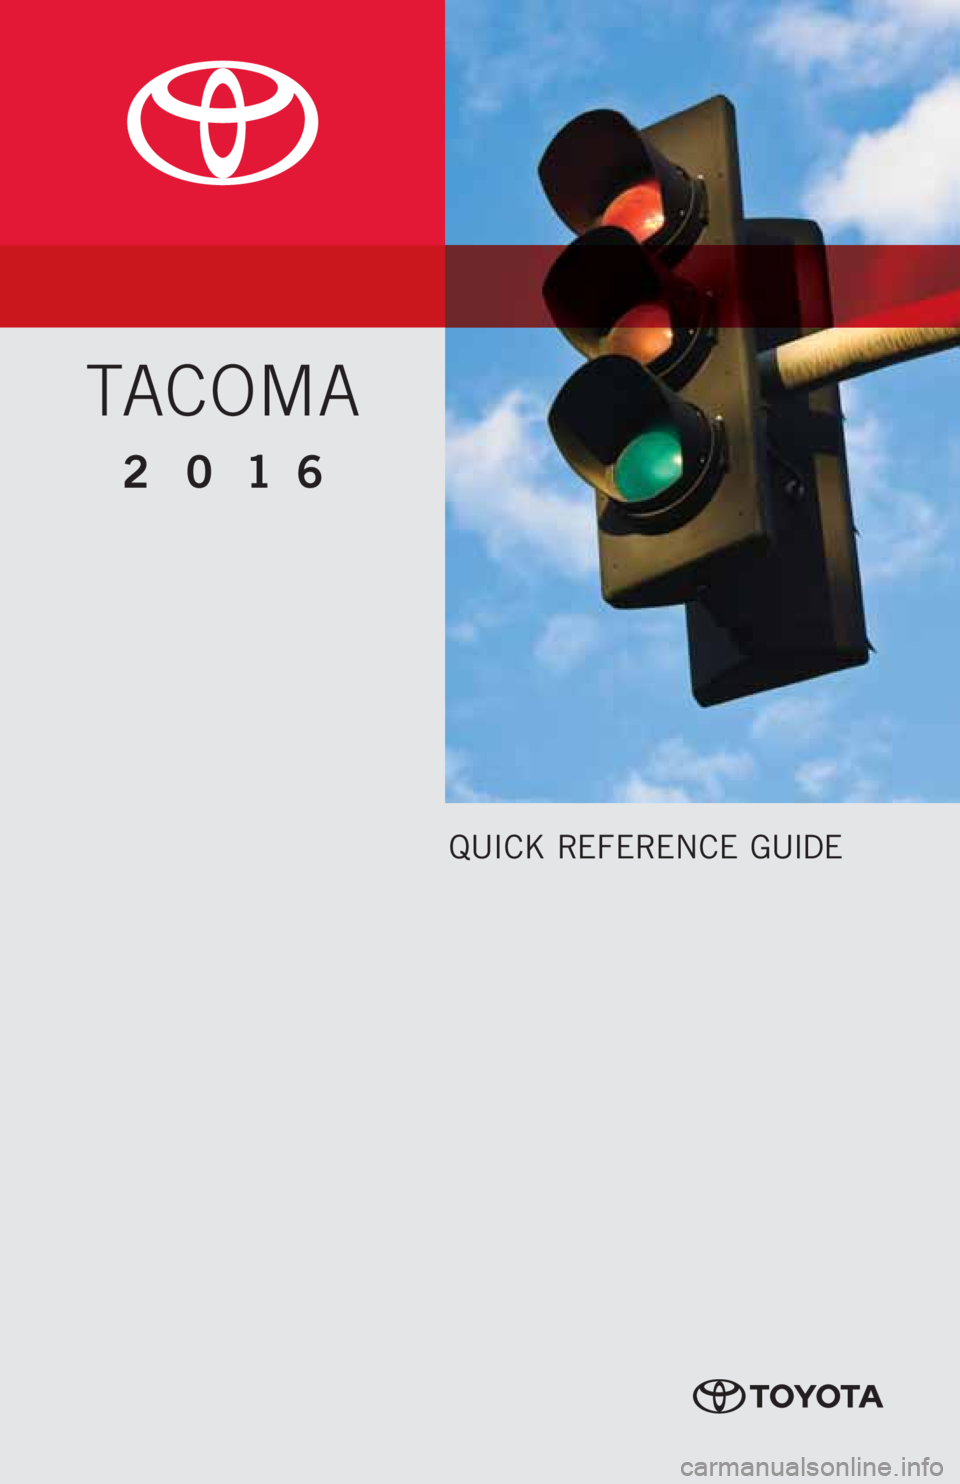 TOYOTA TACOMA 2016  Owners Manual (in English) QUICK REFERENCE GUIDE
2016
TACOMA 